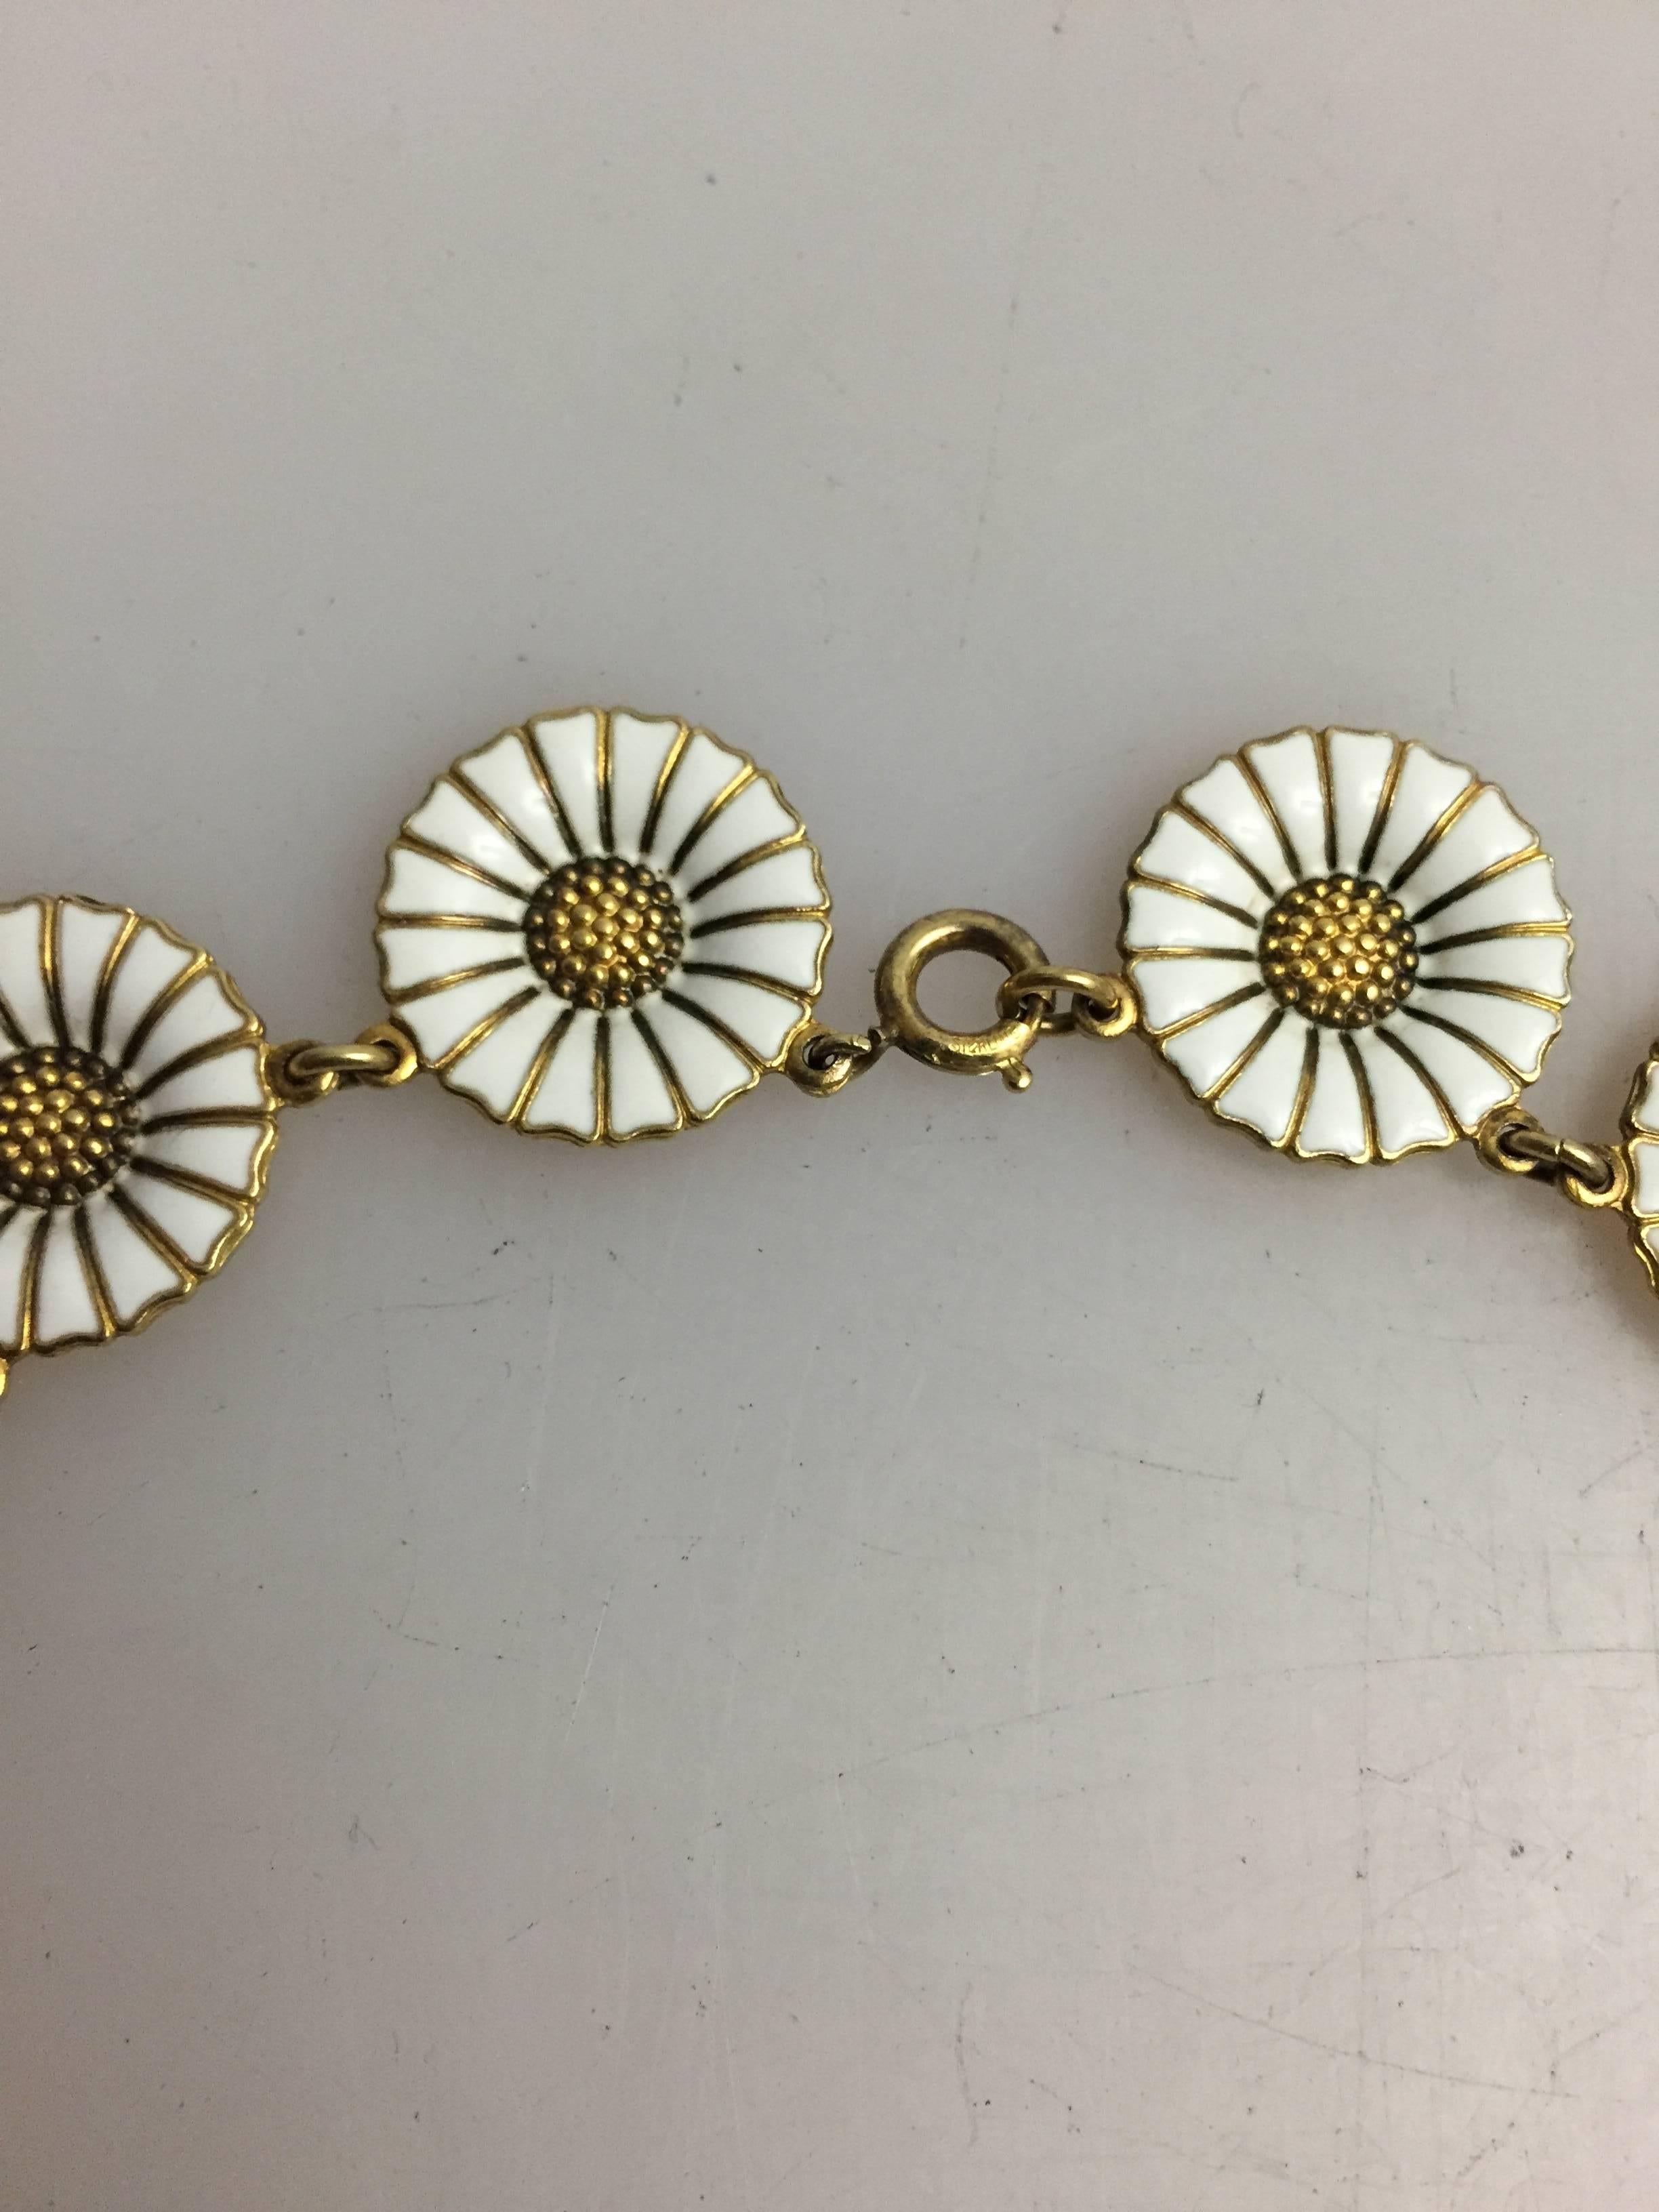 Danish Anton Michelsen Daisy Necklace in Gilded Sterling Silver and Enamel